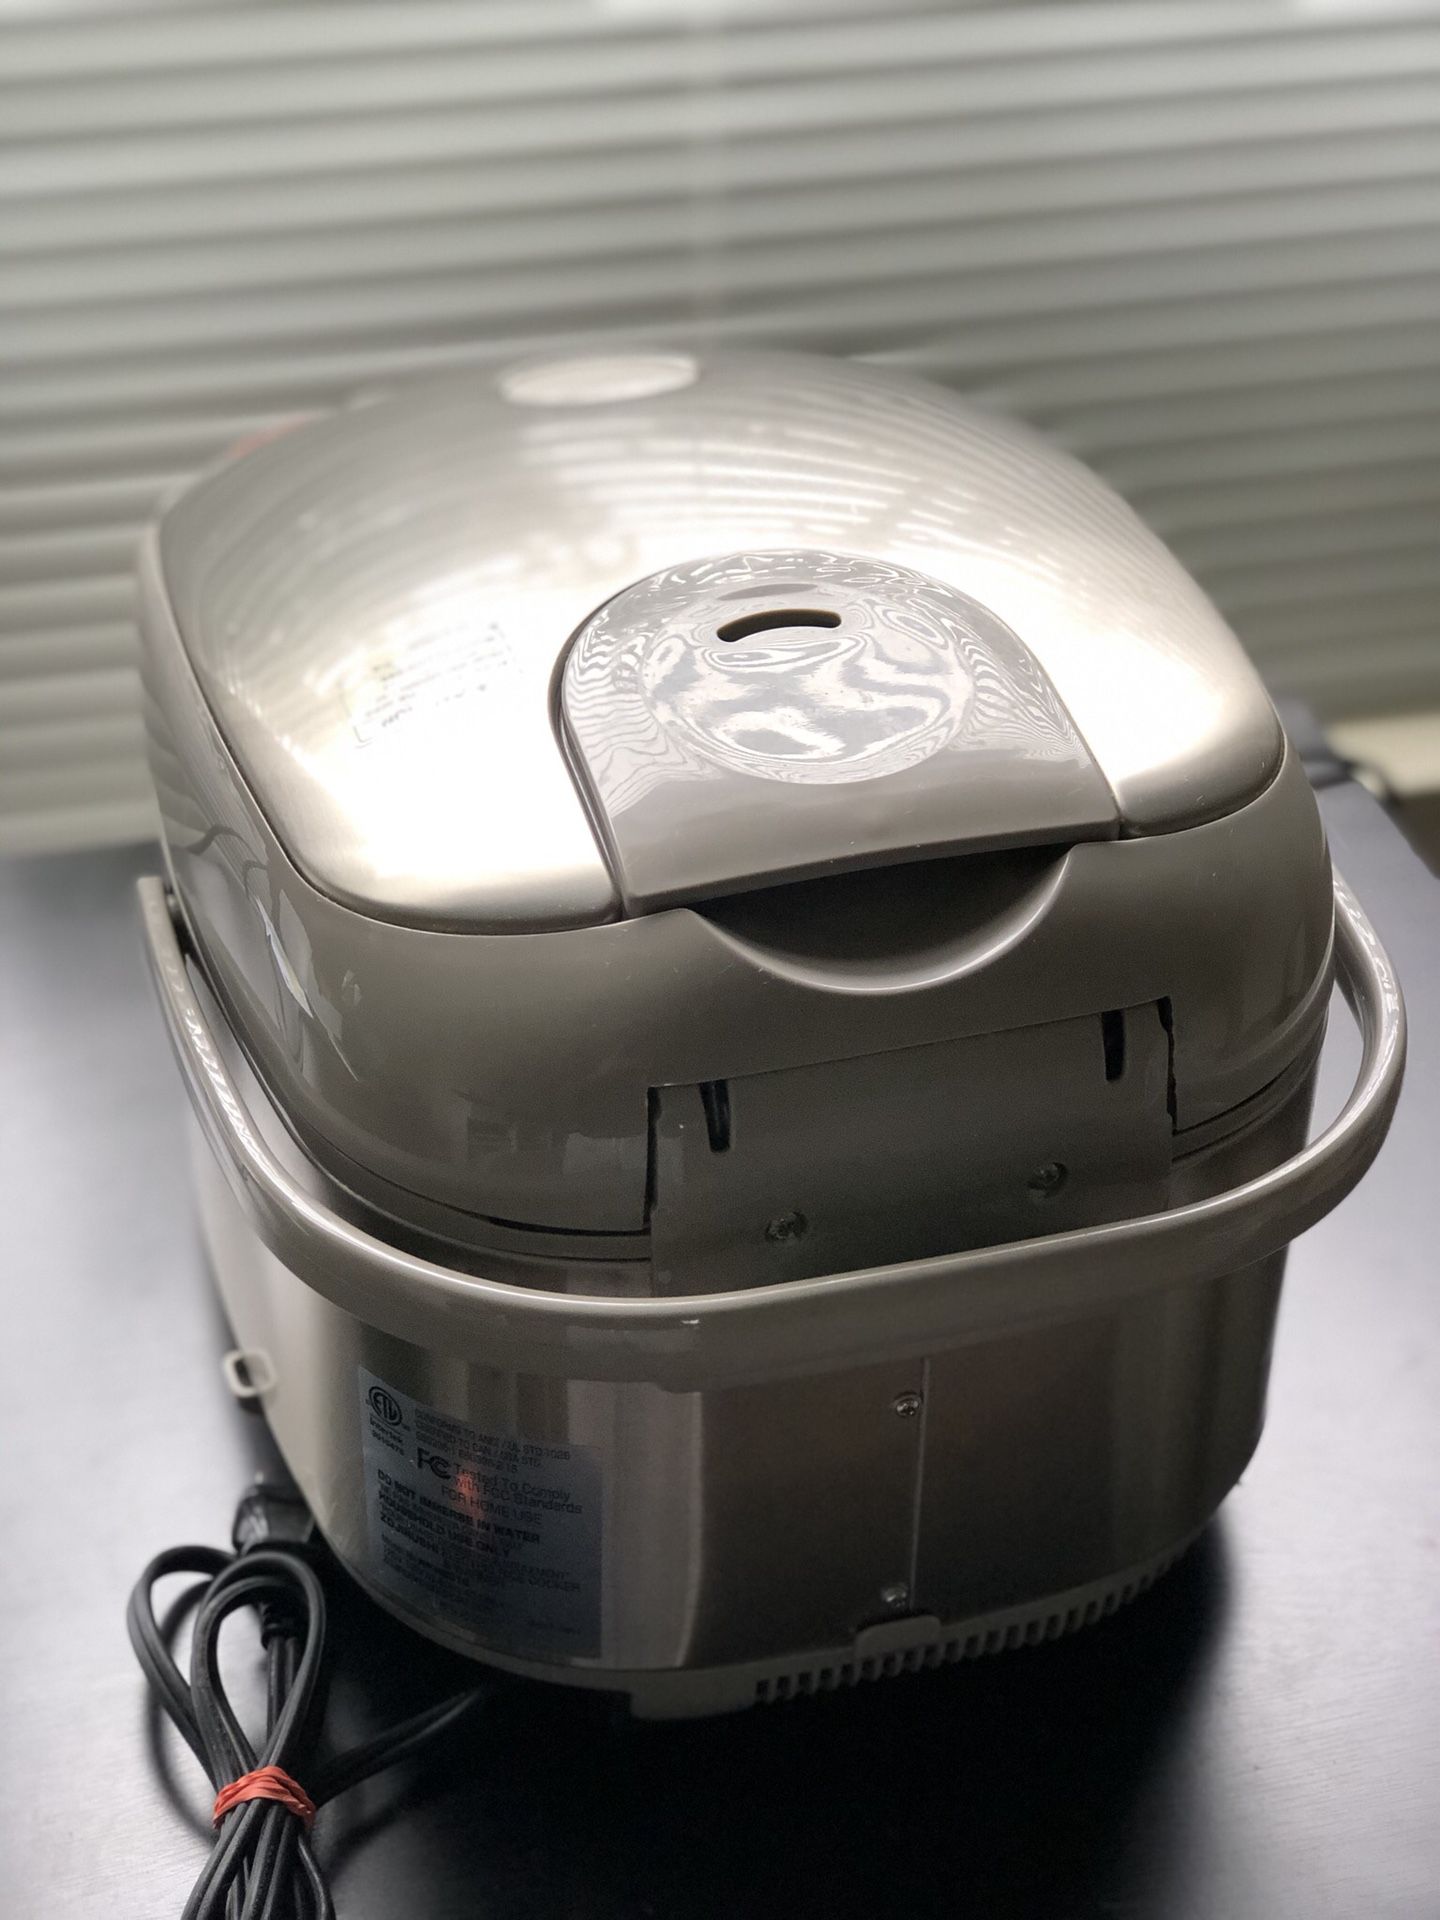 Zojirushi 10 Cup Ih Rice Cooker Np Hbc18 For Sale In Los Angeles Ca